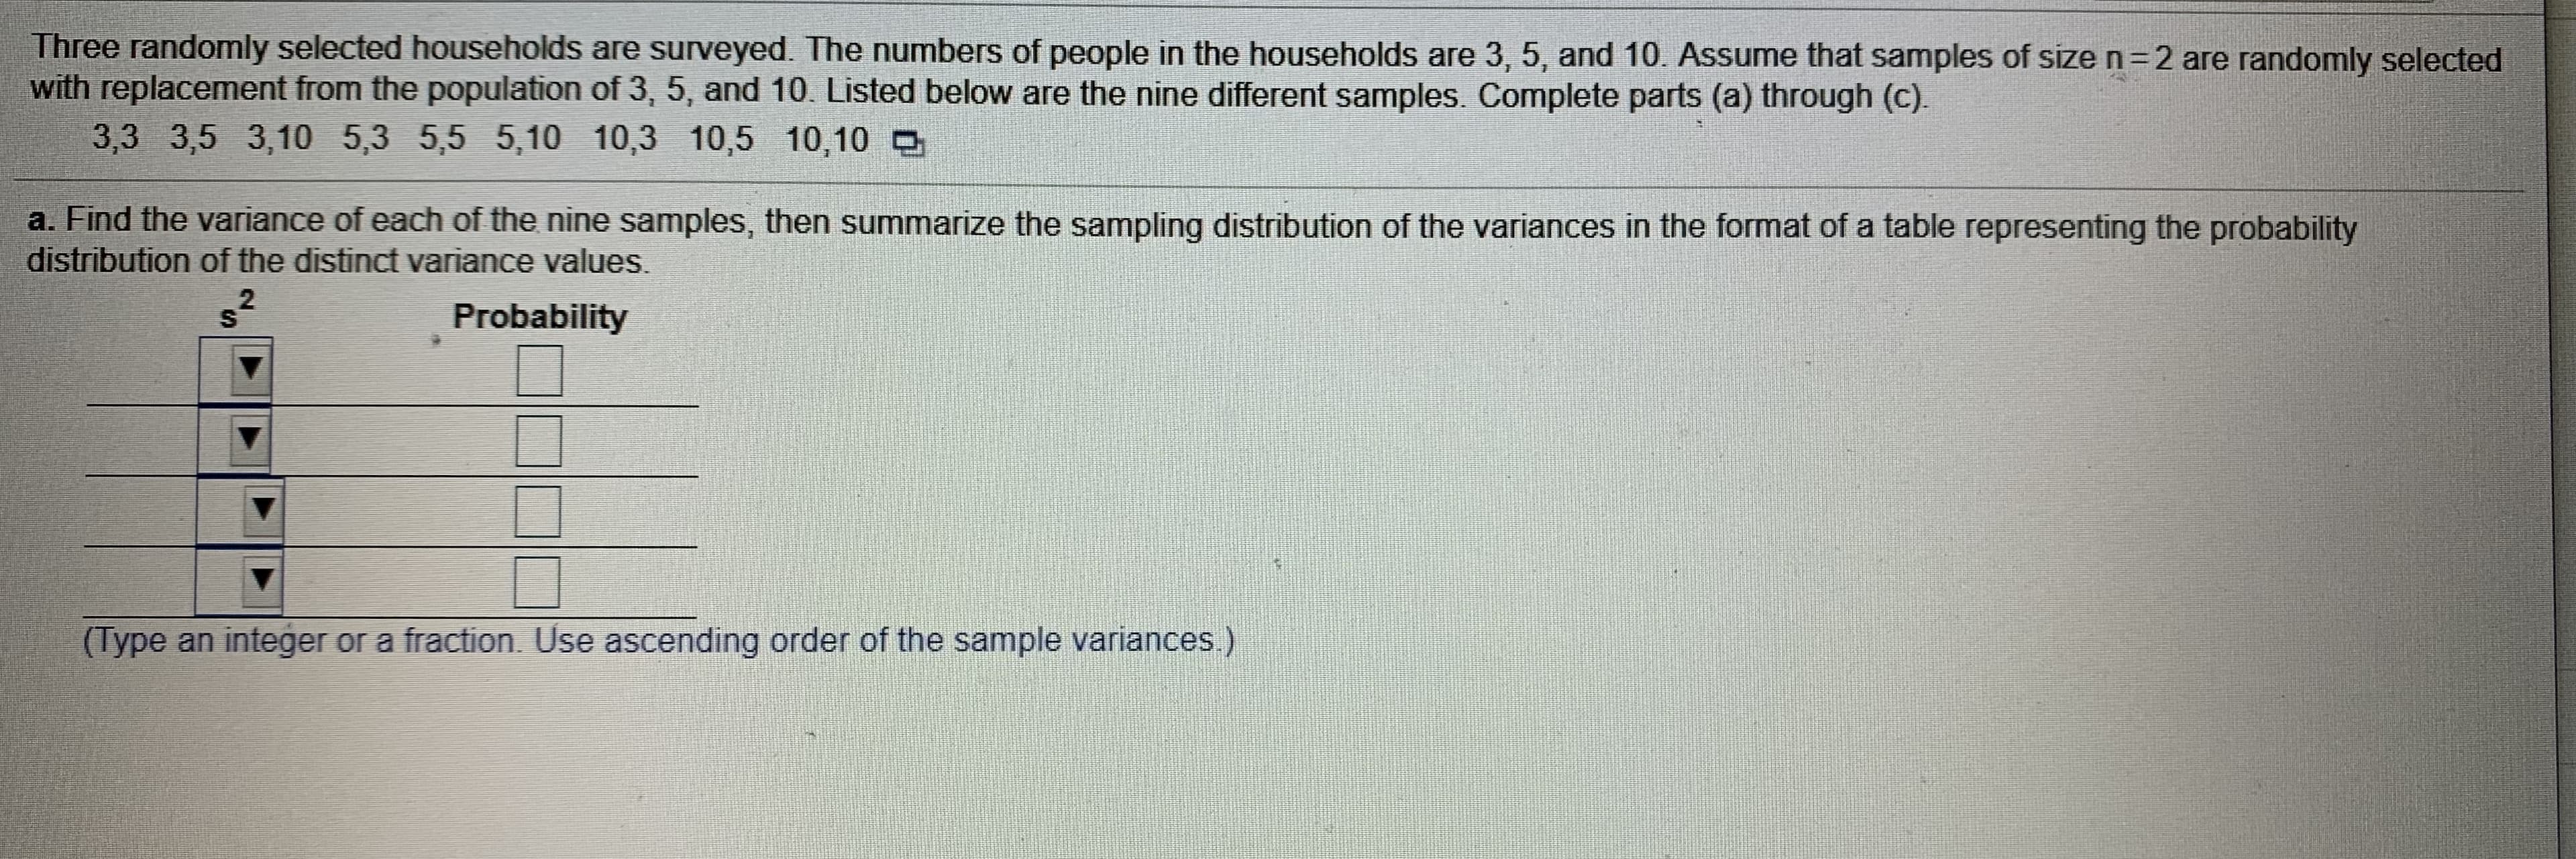 Three randomly selected households are surveyed. The numbers of people in the households are 3, 5, and 10. Assume that samples of size n=2 are randomly selected
with replacement from the population of 3, 5, and 10. Listed below are the nine different samples. Complete parts (a) through (c).
3,3 3,5 3,10 5,3 5,5 5,10 10,3 10,5 10,10 O
a. Find the variance of each of the nine samples, then summarize the sampling distribution of the variances in the format of a table representing the probability
distribution of the distinct variance values.
Probability
(Type an integer or a fraction. Use ascending order of the sample variances.)
